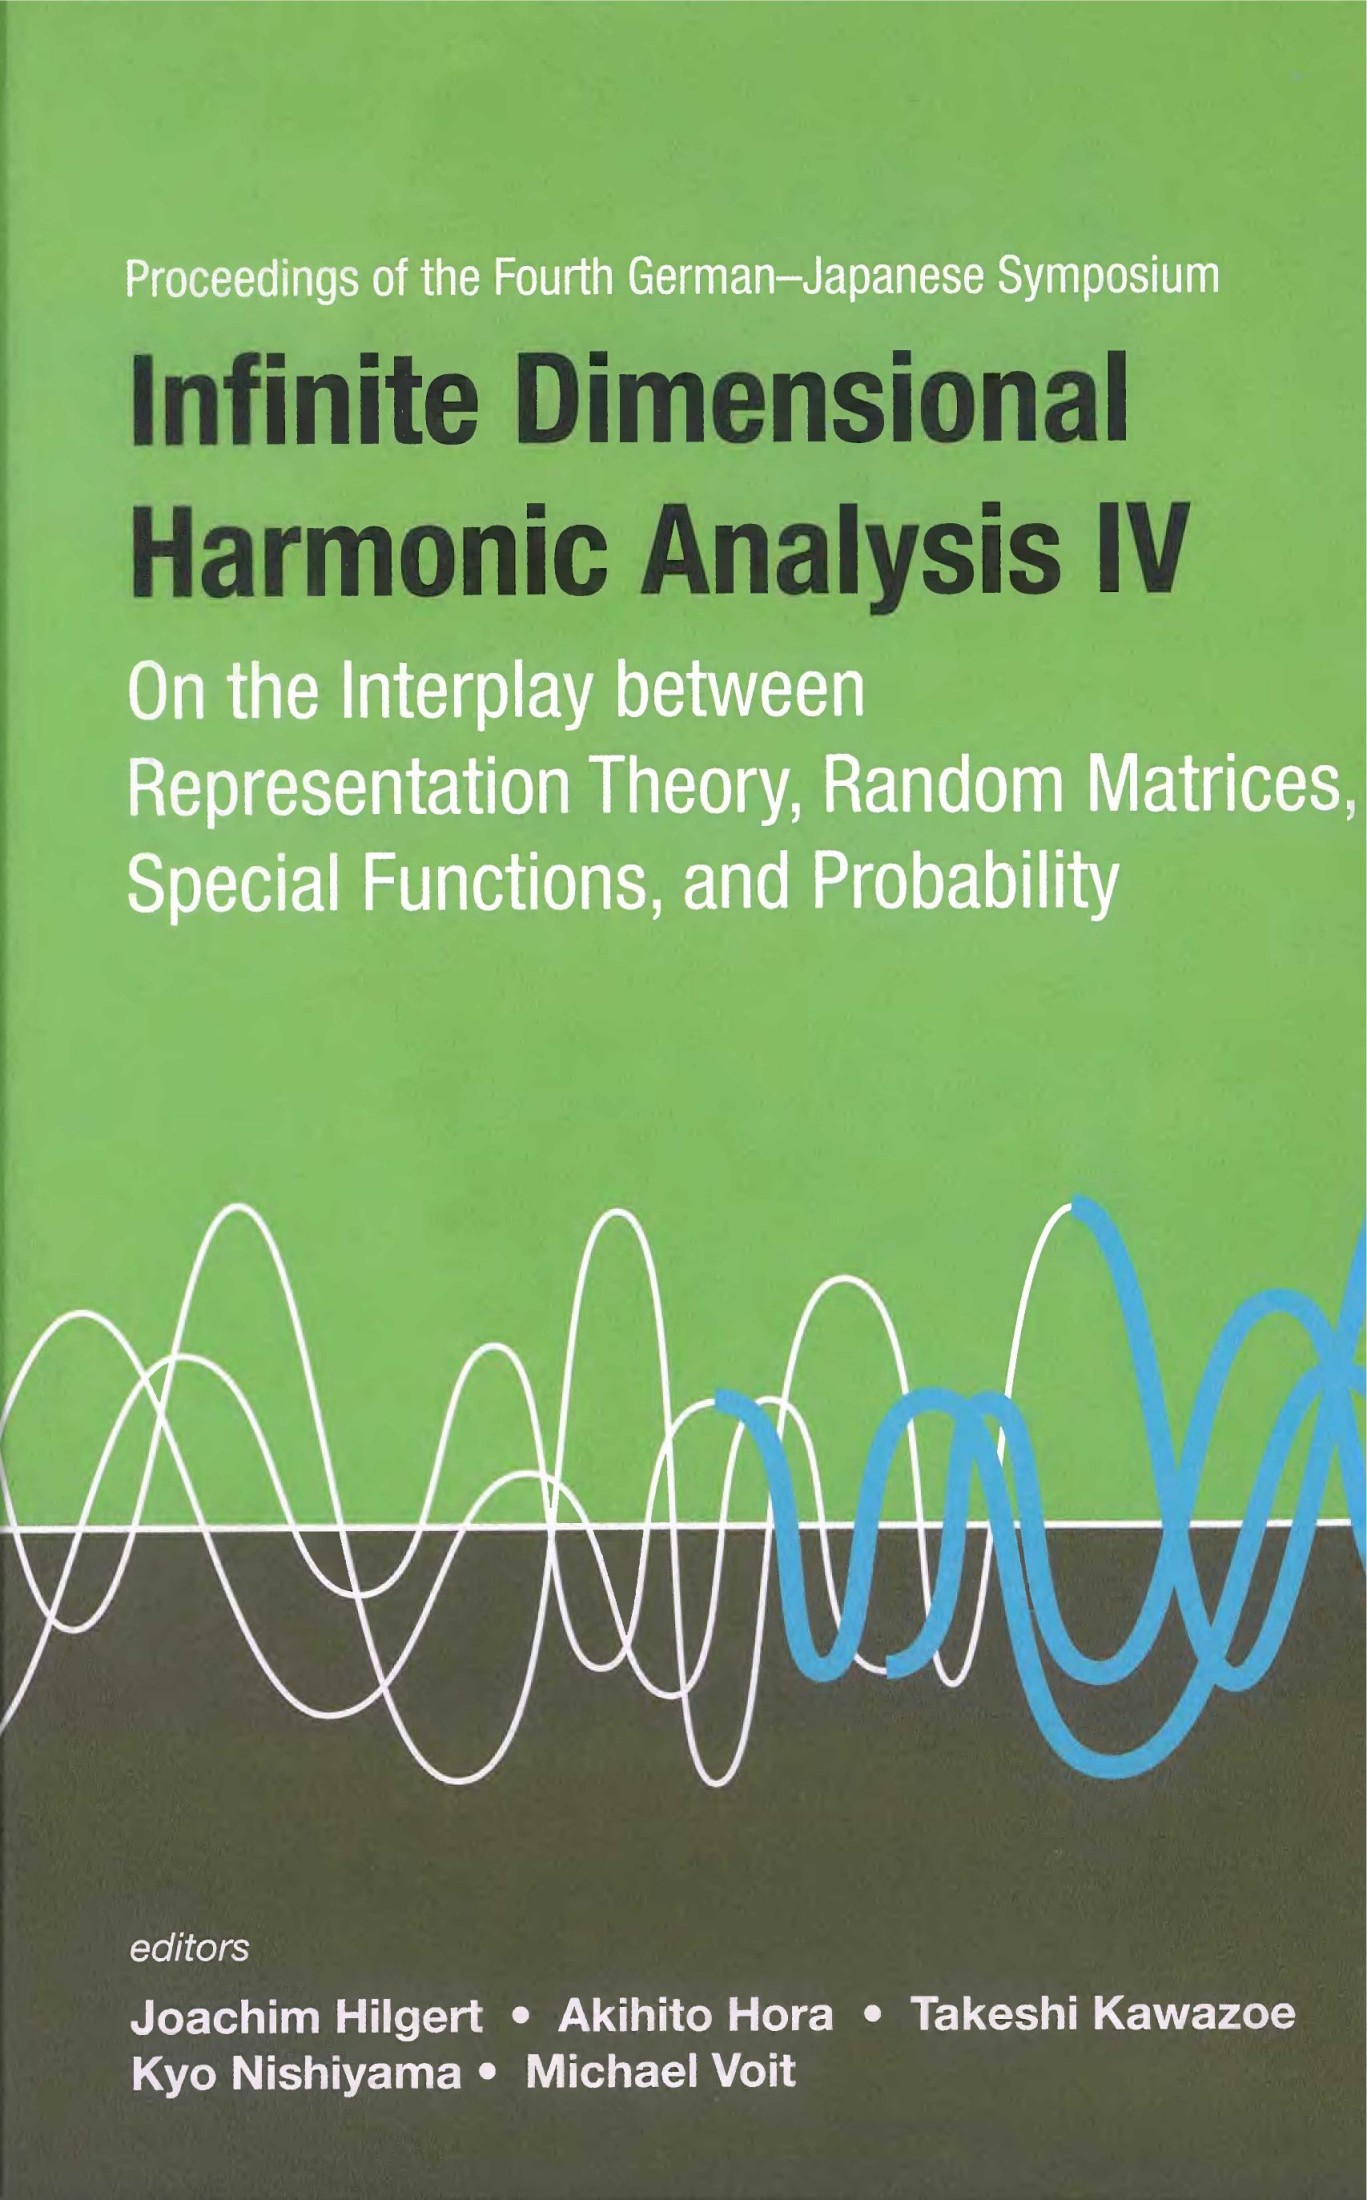 Proceedings of the Fourth German-Japanese Symposium, Infinite Dimensional Harmonic Analysis IV: On the Interplay Between Representation Theory, Random Matrices, Special Functions, and Probability : The University of Tokyo, Japan, 10-14 September 2007